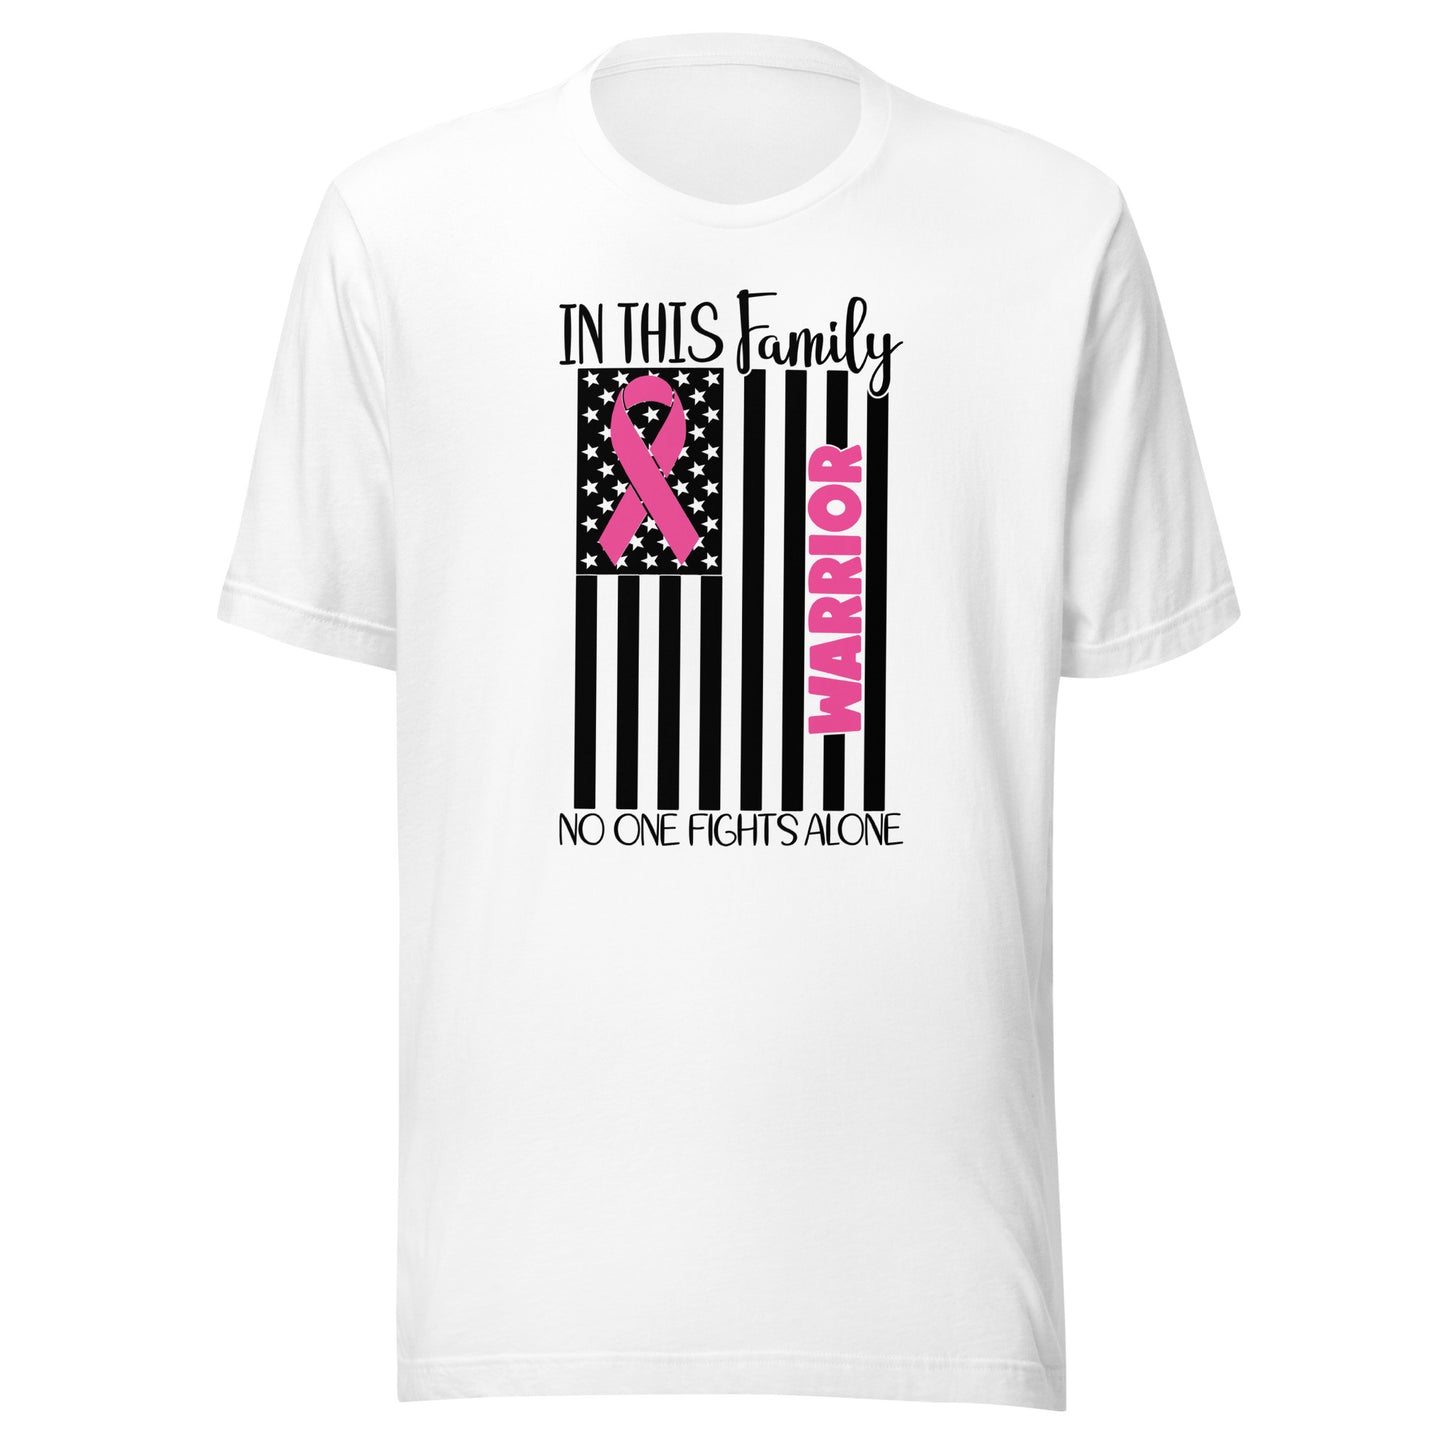 Nobody Fights Alone - Breast Cancer Awareness Pink Cancer Ribbon Flag Unisex T-shirt